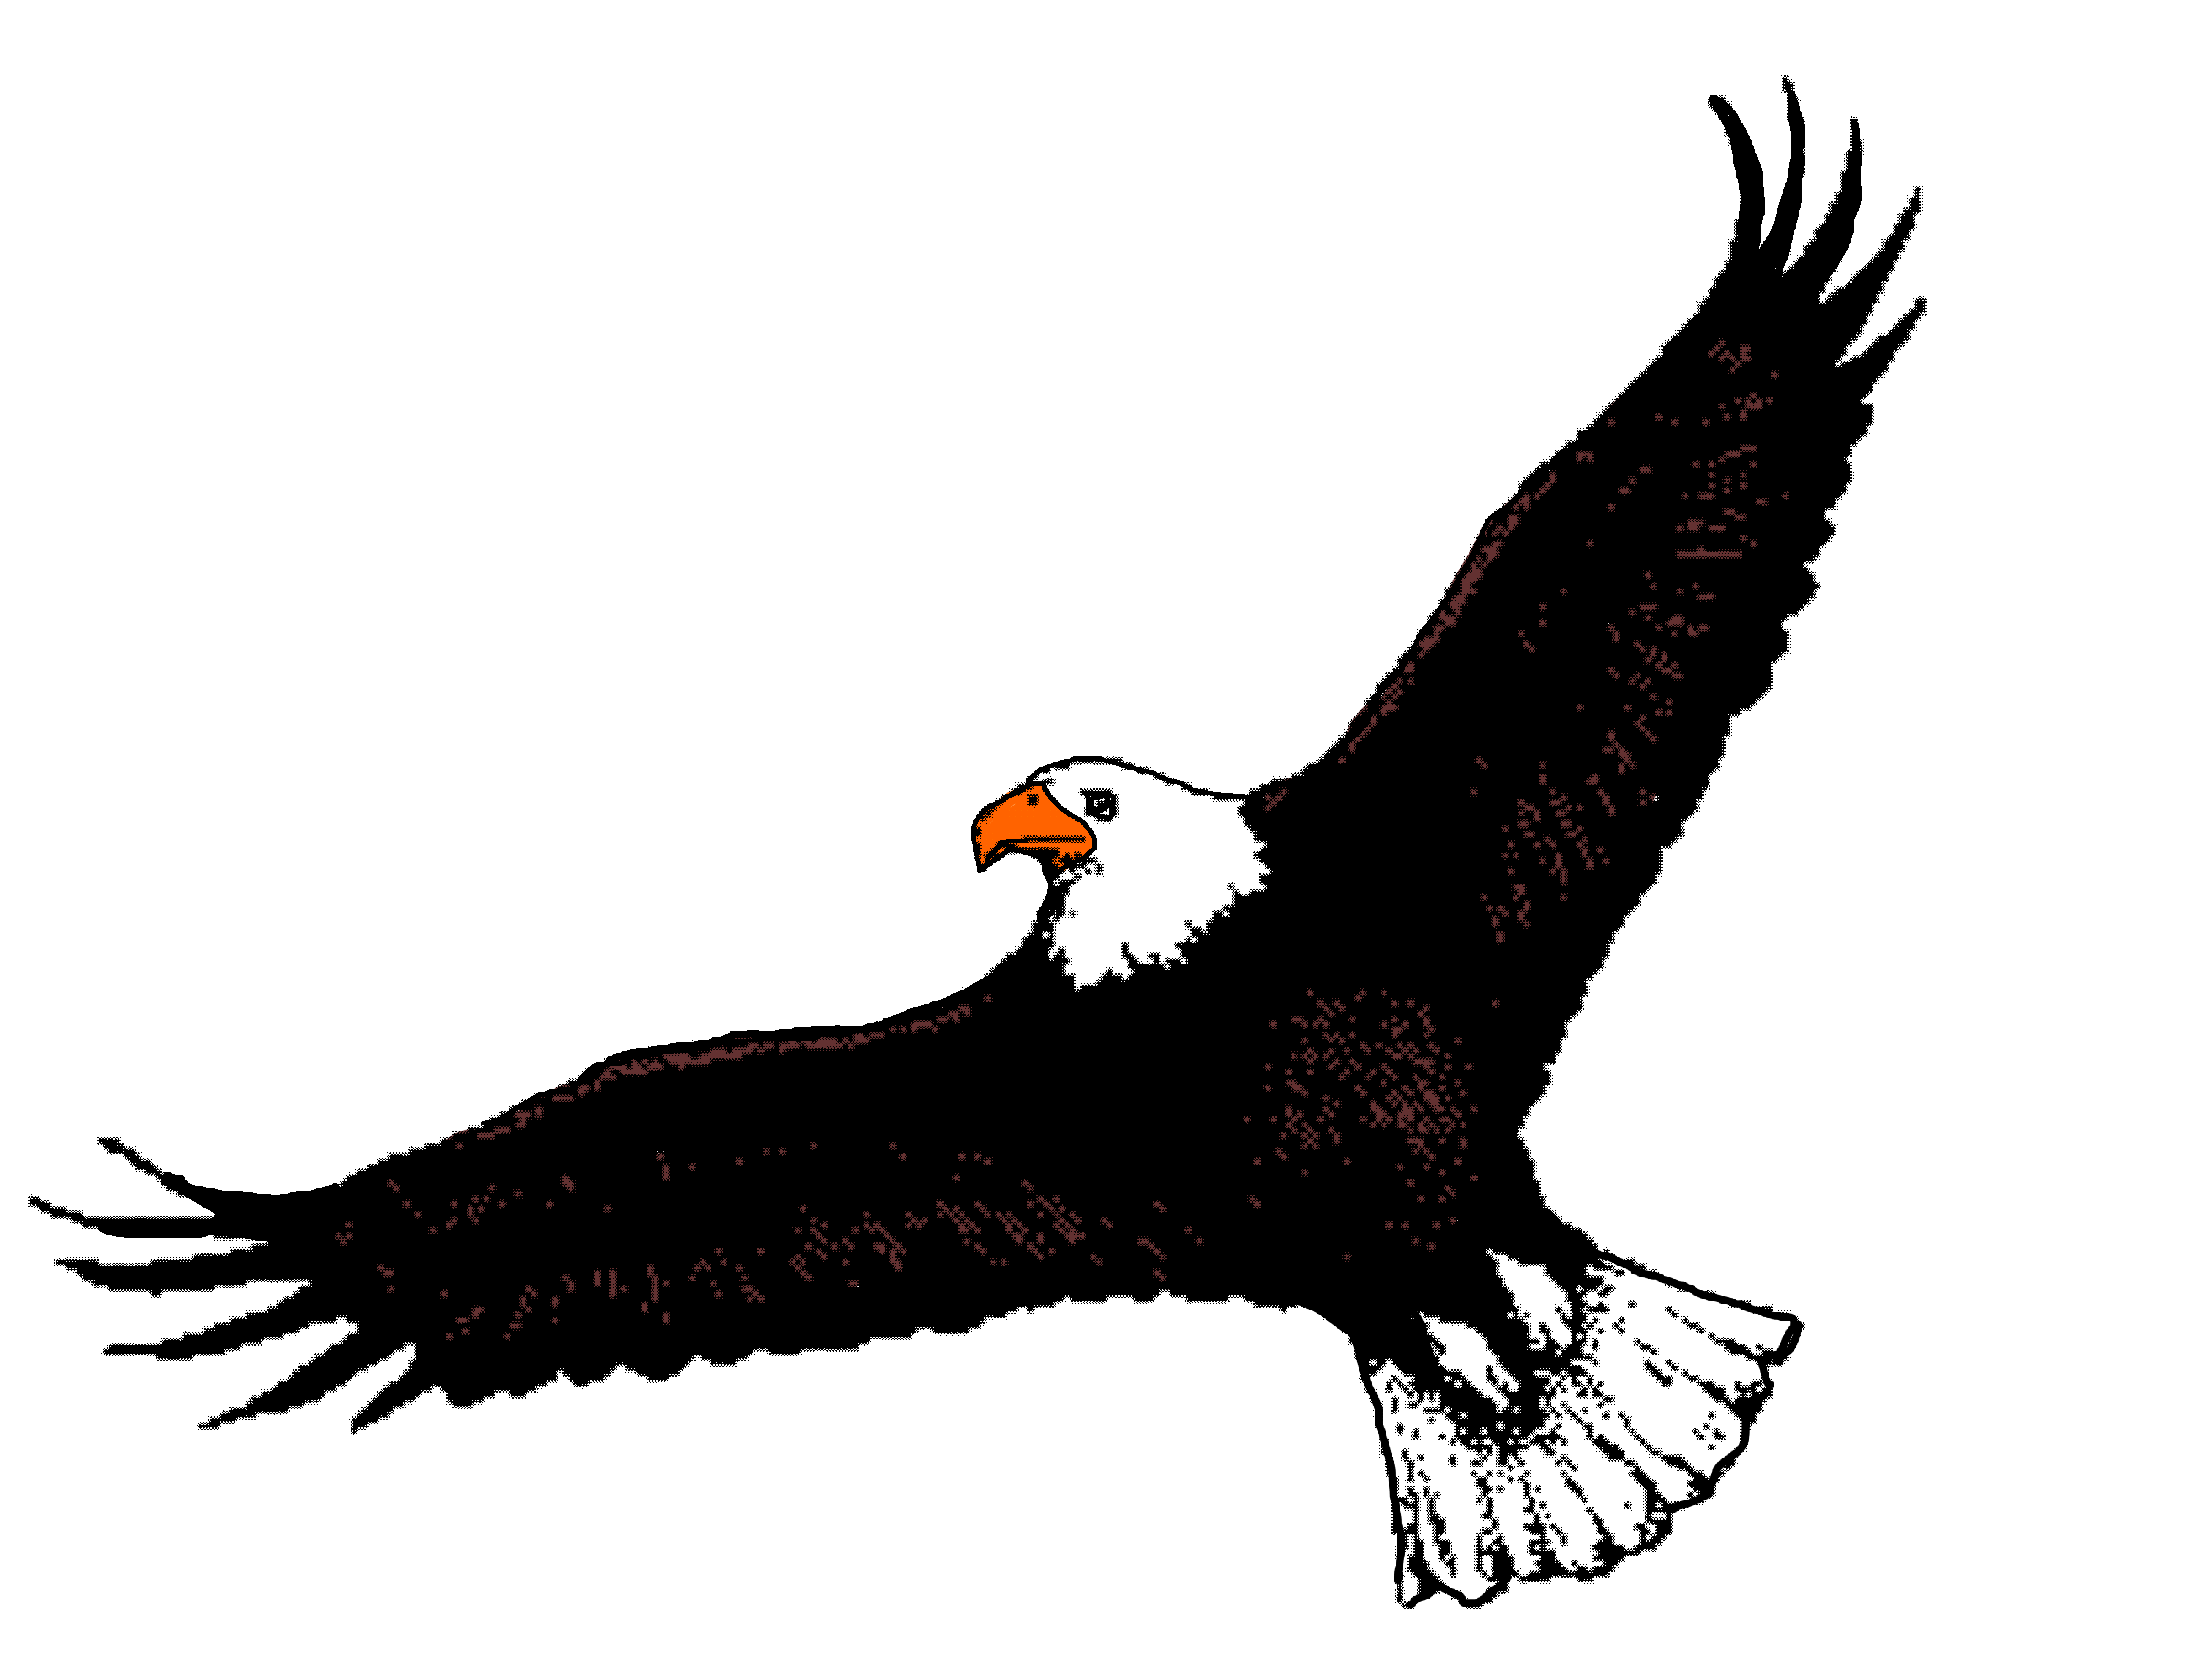 Free Eagle Flying Cliparts, Download Free Clip Art, Free Clip Art on.